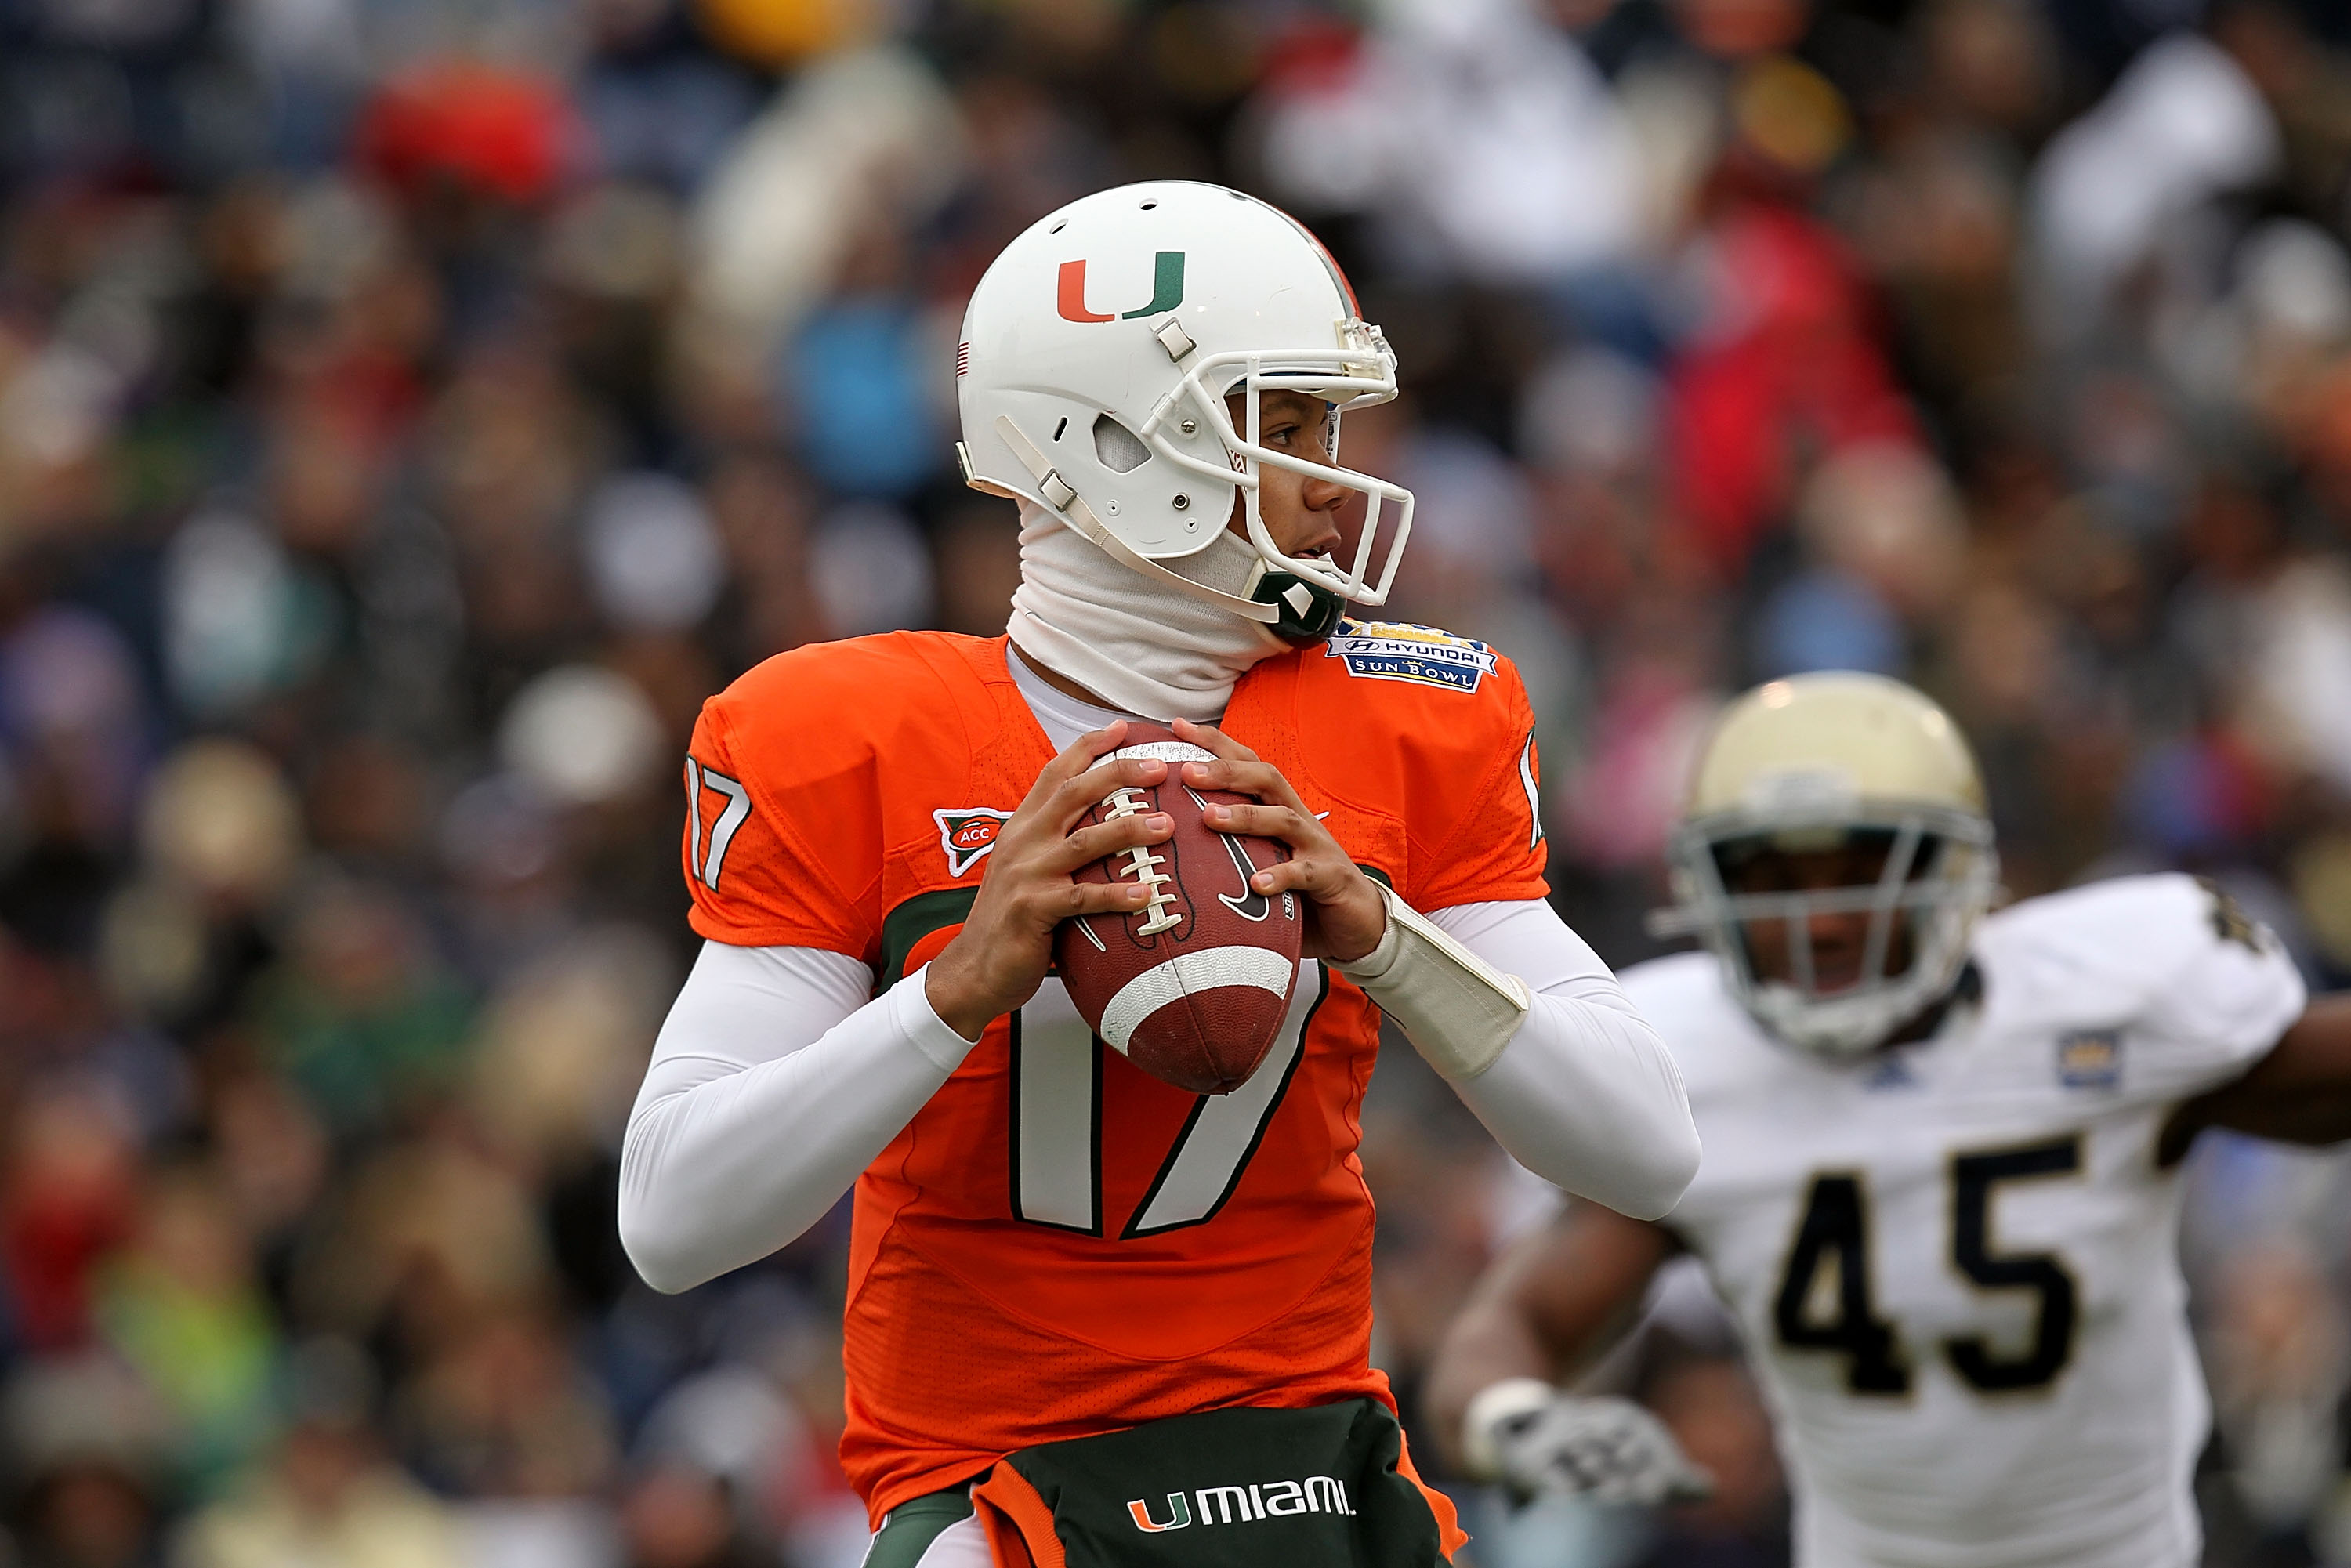 EL PASO, TX - DECEMBER 30:  Quarterback Stephen Morris #17 of the Miami Hurricanes throws against the Notre Dame Fighting Irish at Sun Bowl on December 30, 2010 in El Paso, Texas.  (Photo by Ronald Martinez/Getty Images)